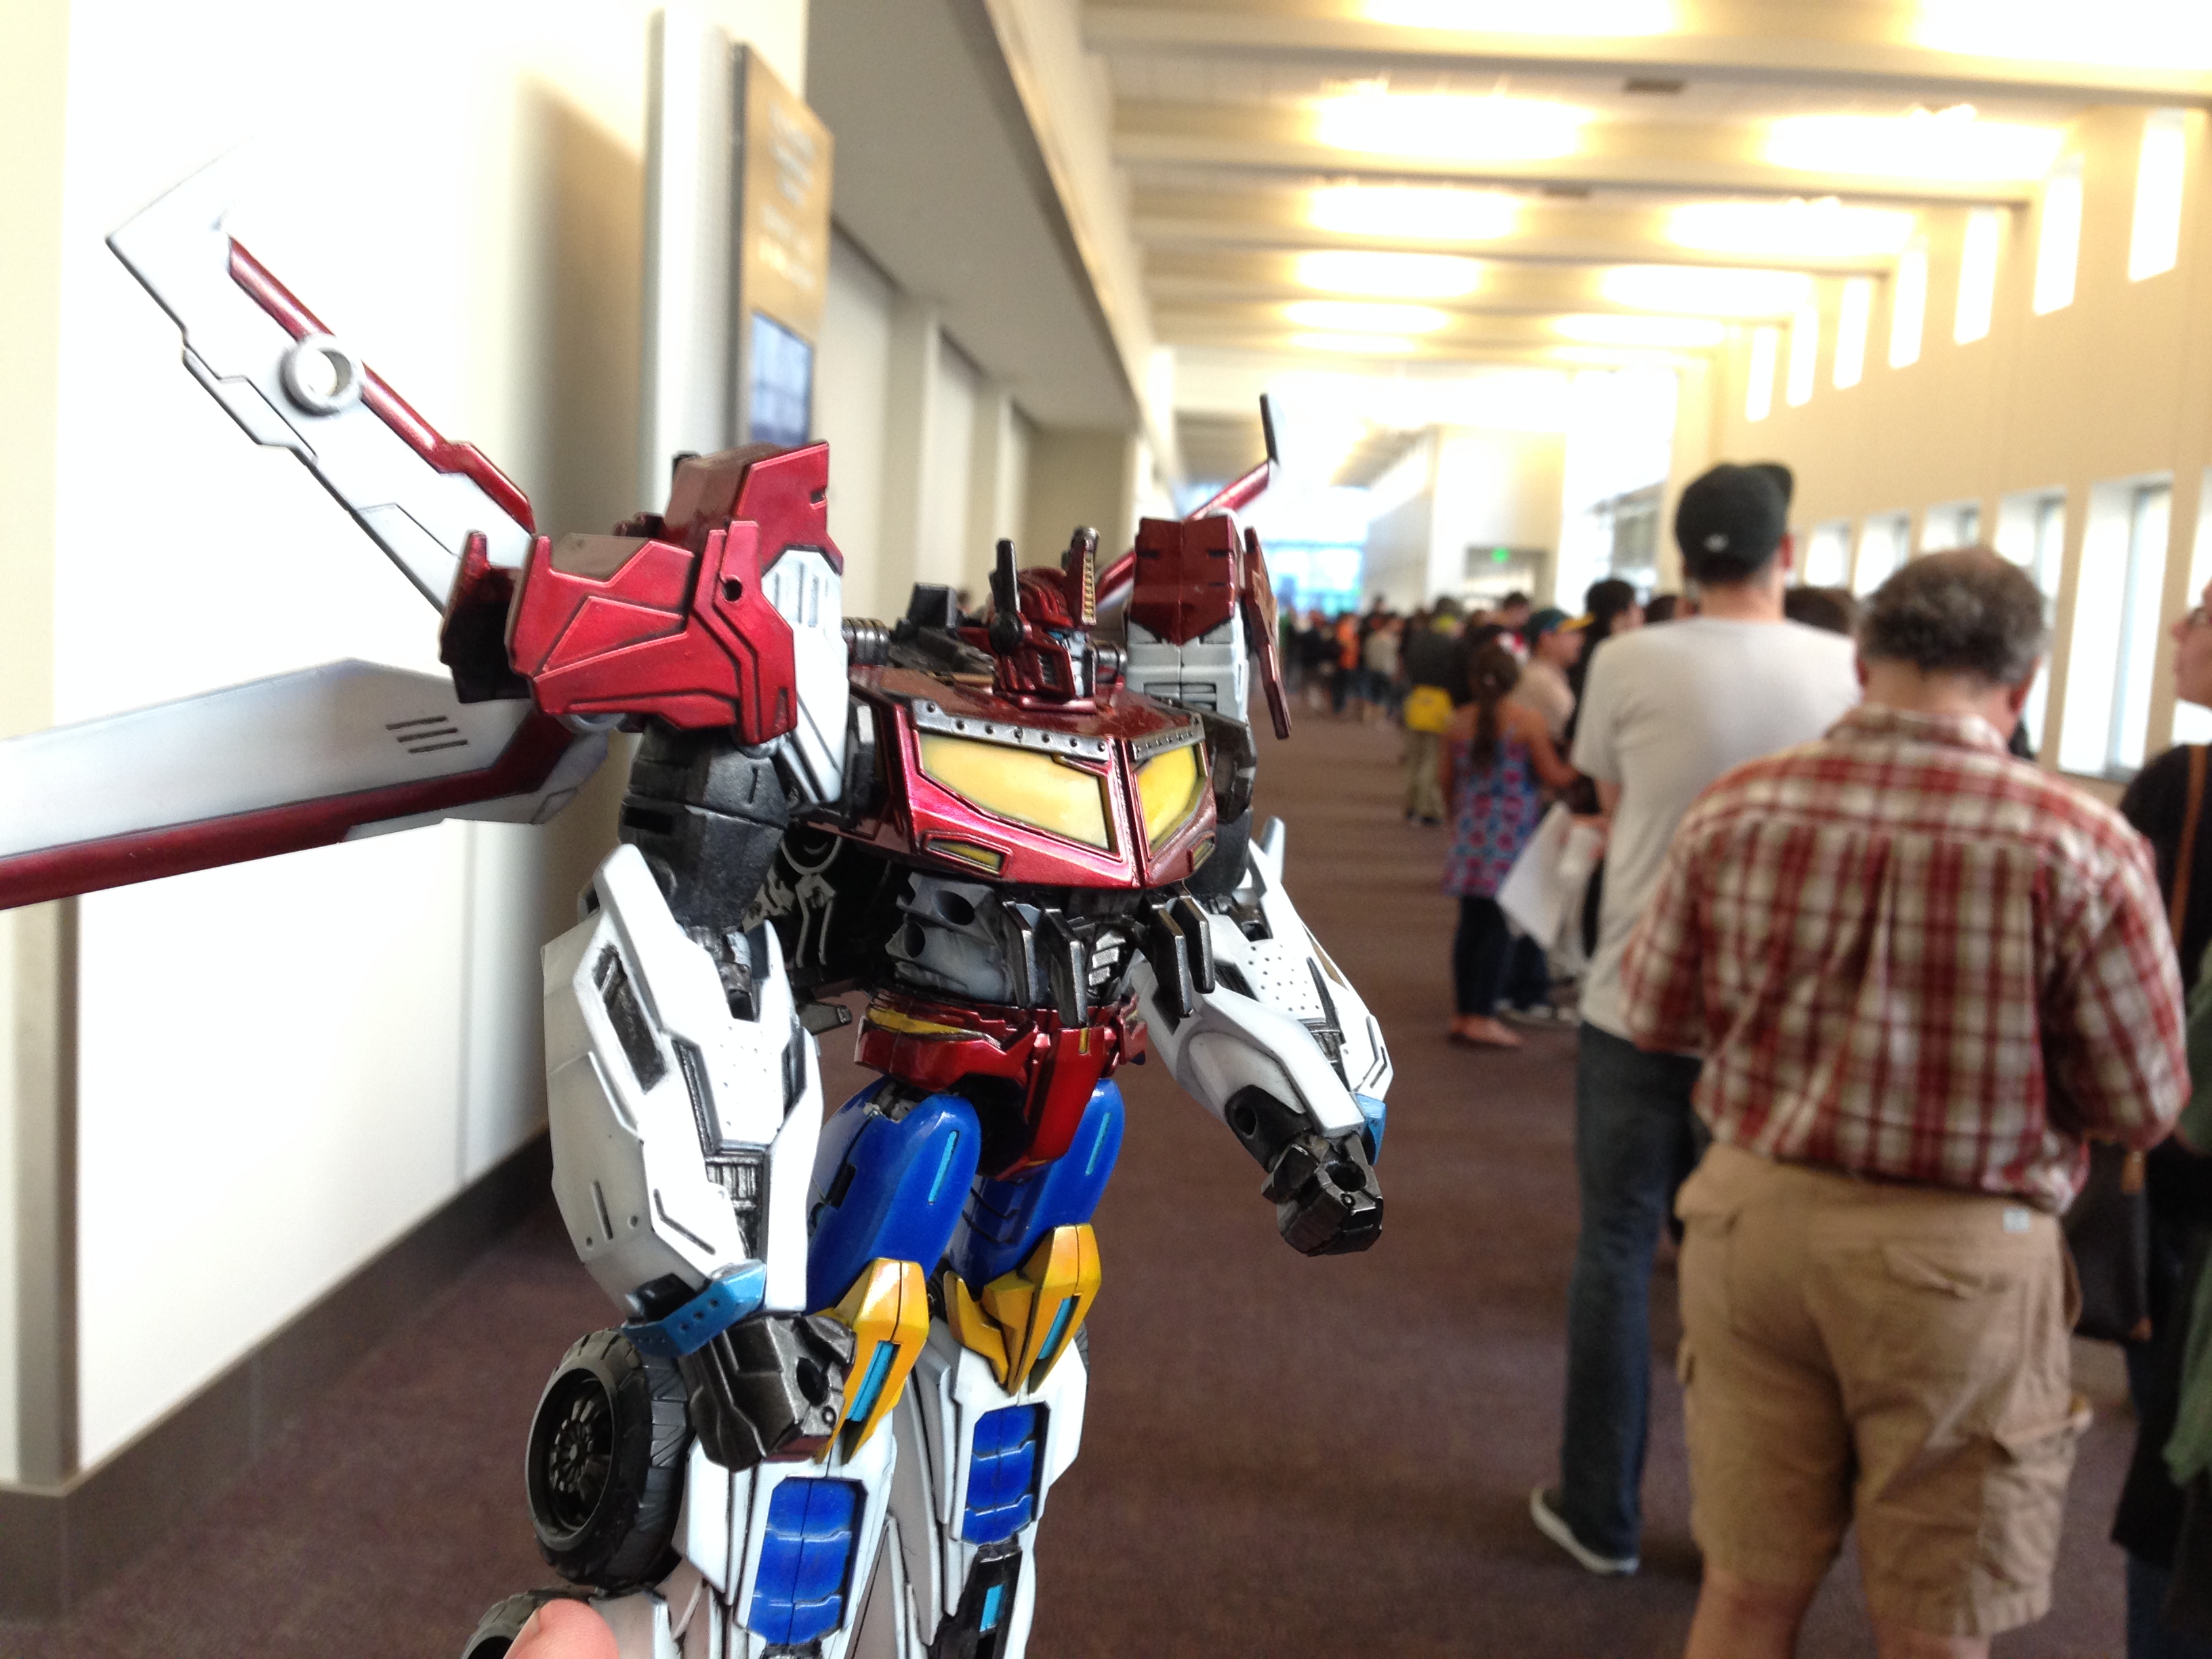 Victory Saber in the queue for the boxset. (Botcon Day 1)